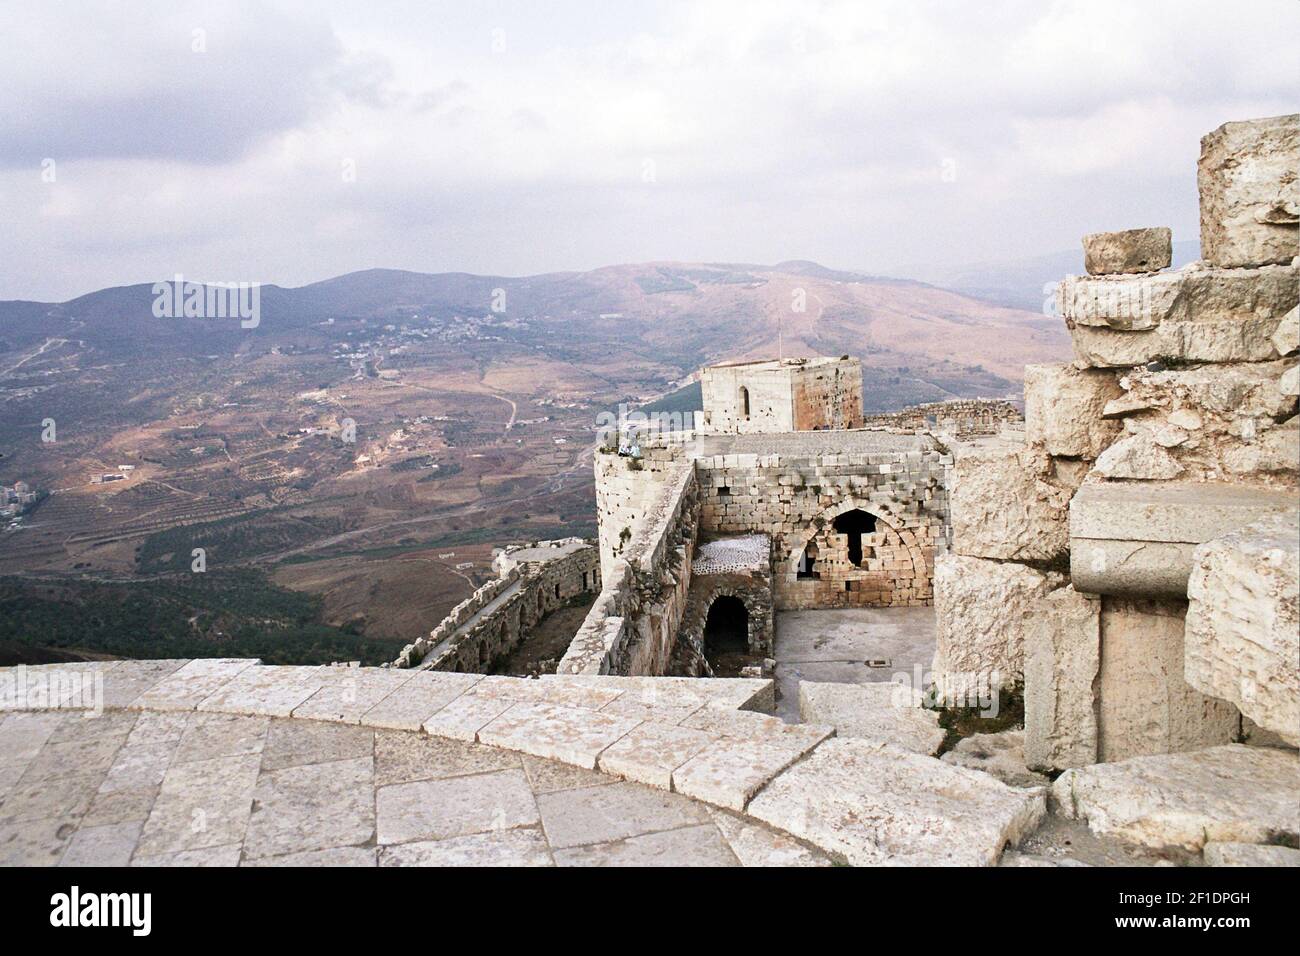 View from the cruisader castle of Krak des Chevaliers, Syria. Ancient monuments across Syria are under threat as a result of the civil war which began in 2011. Temples in the Roman city of Palmyra have been attacked by Islamic State, while other sites have suffered shelling from government forces and been stripped by looters. (Photo by Dominic Dudley / Pacific Press) *** Please Use Credit from Credit Field *** Stock Photo